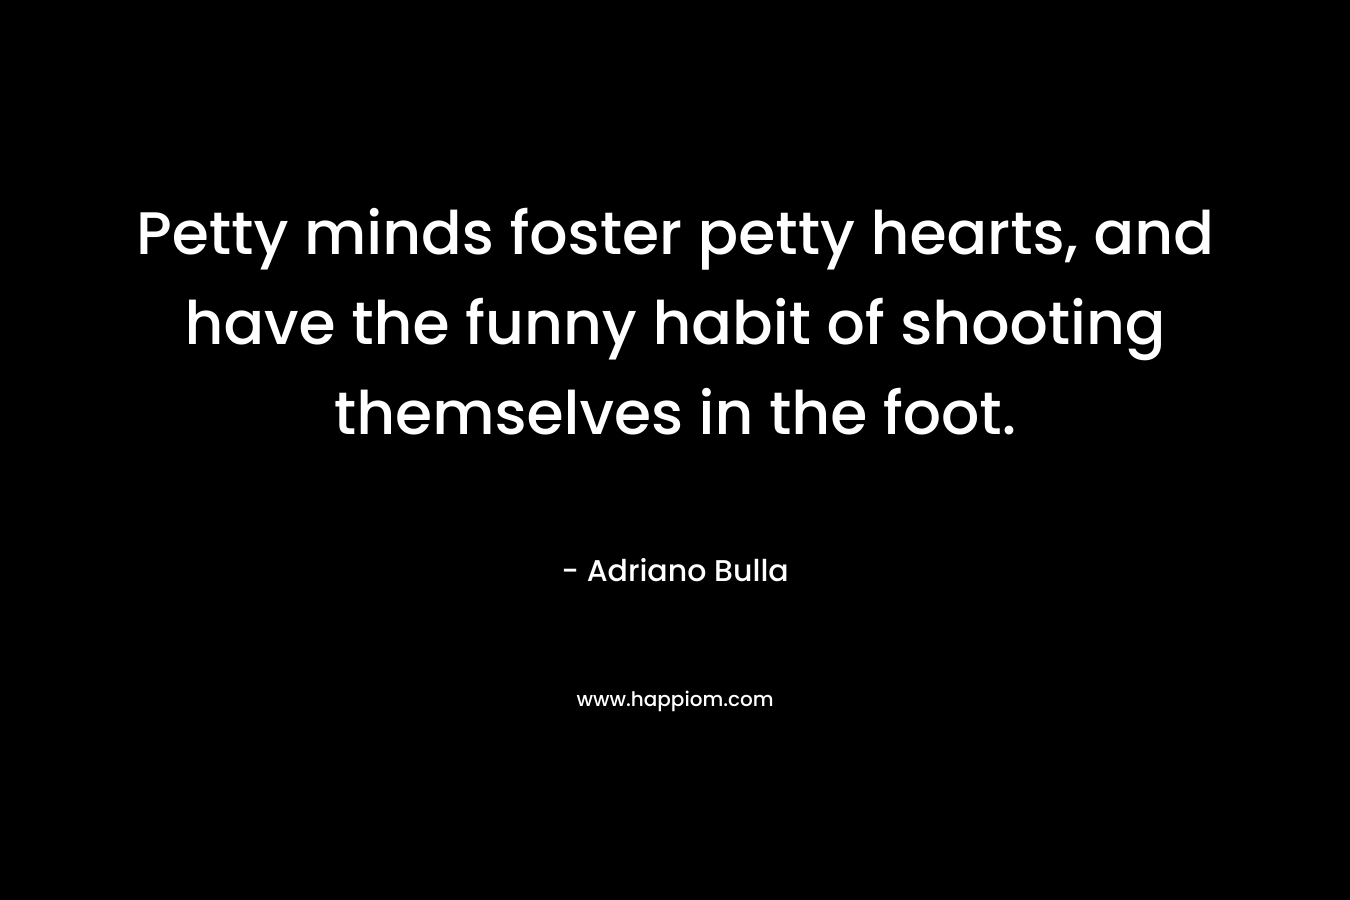 Petty minds foster petty hearts, and have the funny habit of shooting themselves in the foot.